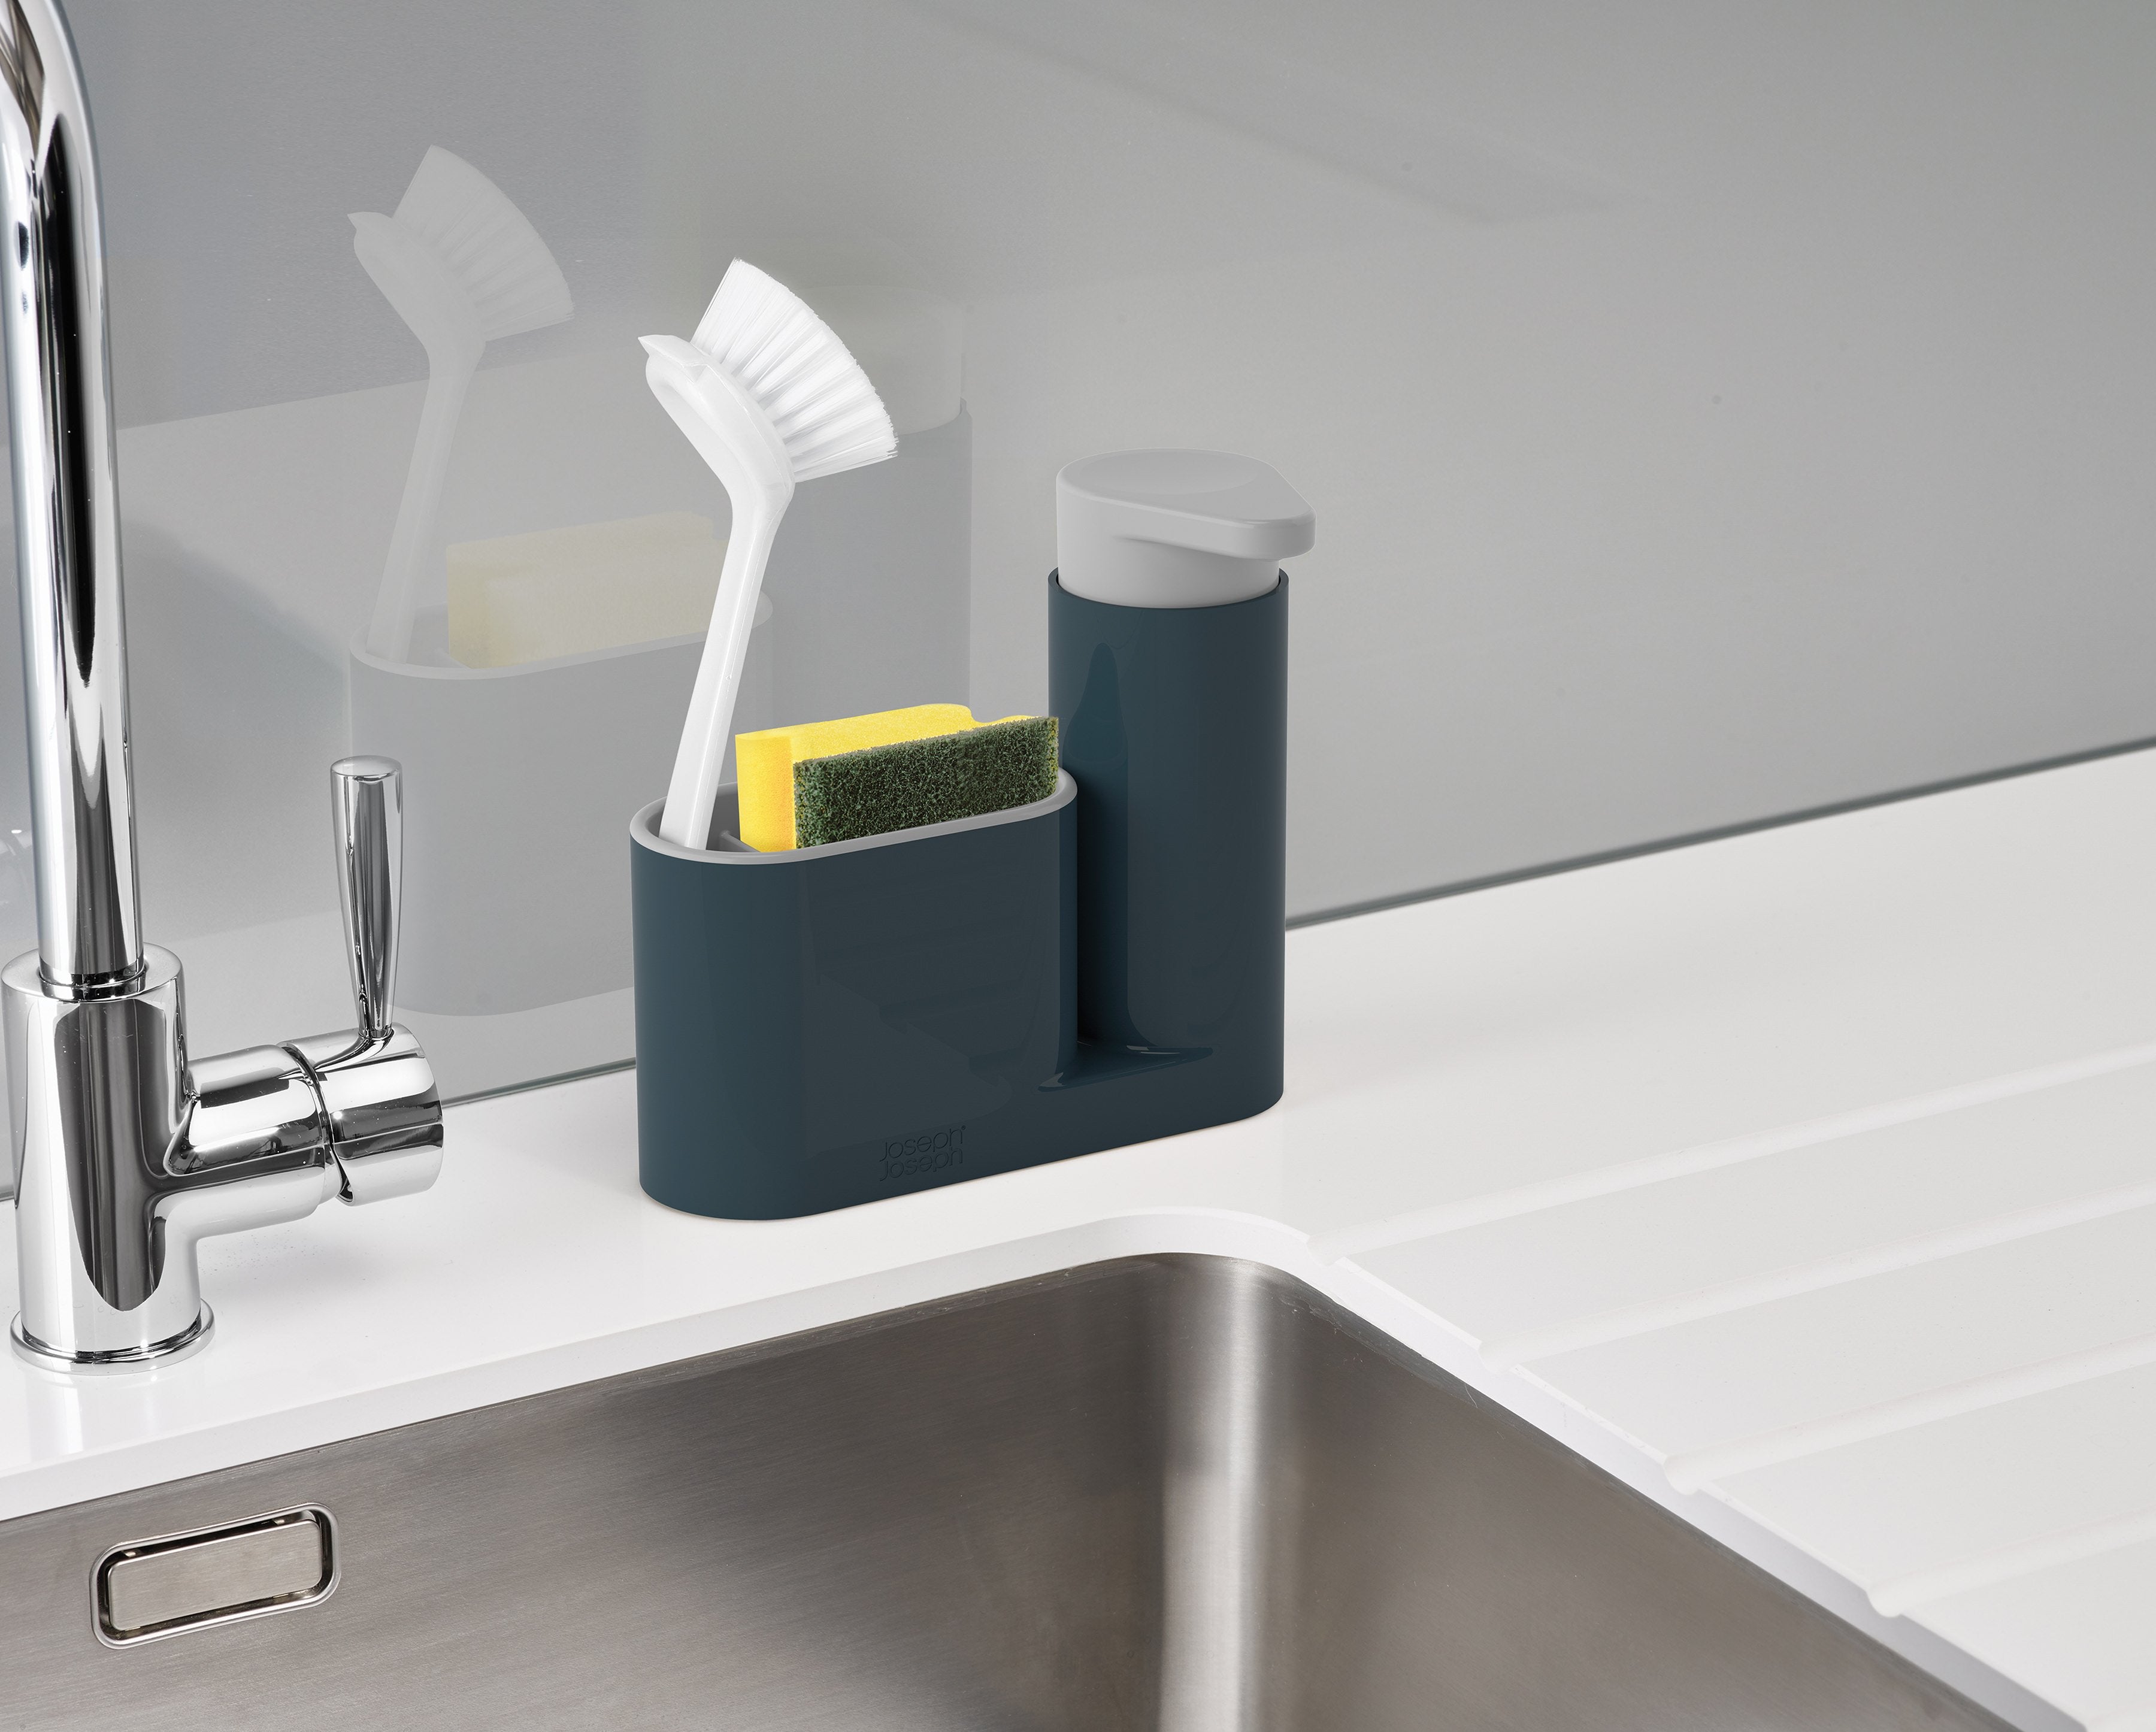 BEON.COM.AU  This multi-purpose unit is the perfect tool for bringing organisation to the area around your sink.  Set includes an easy-press soap pump and integrated sink tidy Easy-press soap pump suitable for all liquid soaps and lotions Slimline sink tidy is perfect for storing brushes and sponges Dismantl... Joseph Joseph at BEON.COM.AU